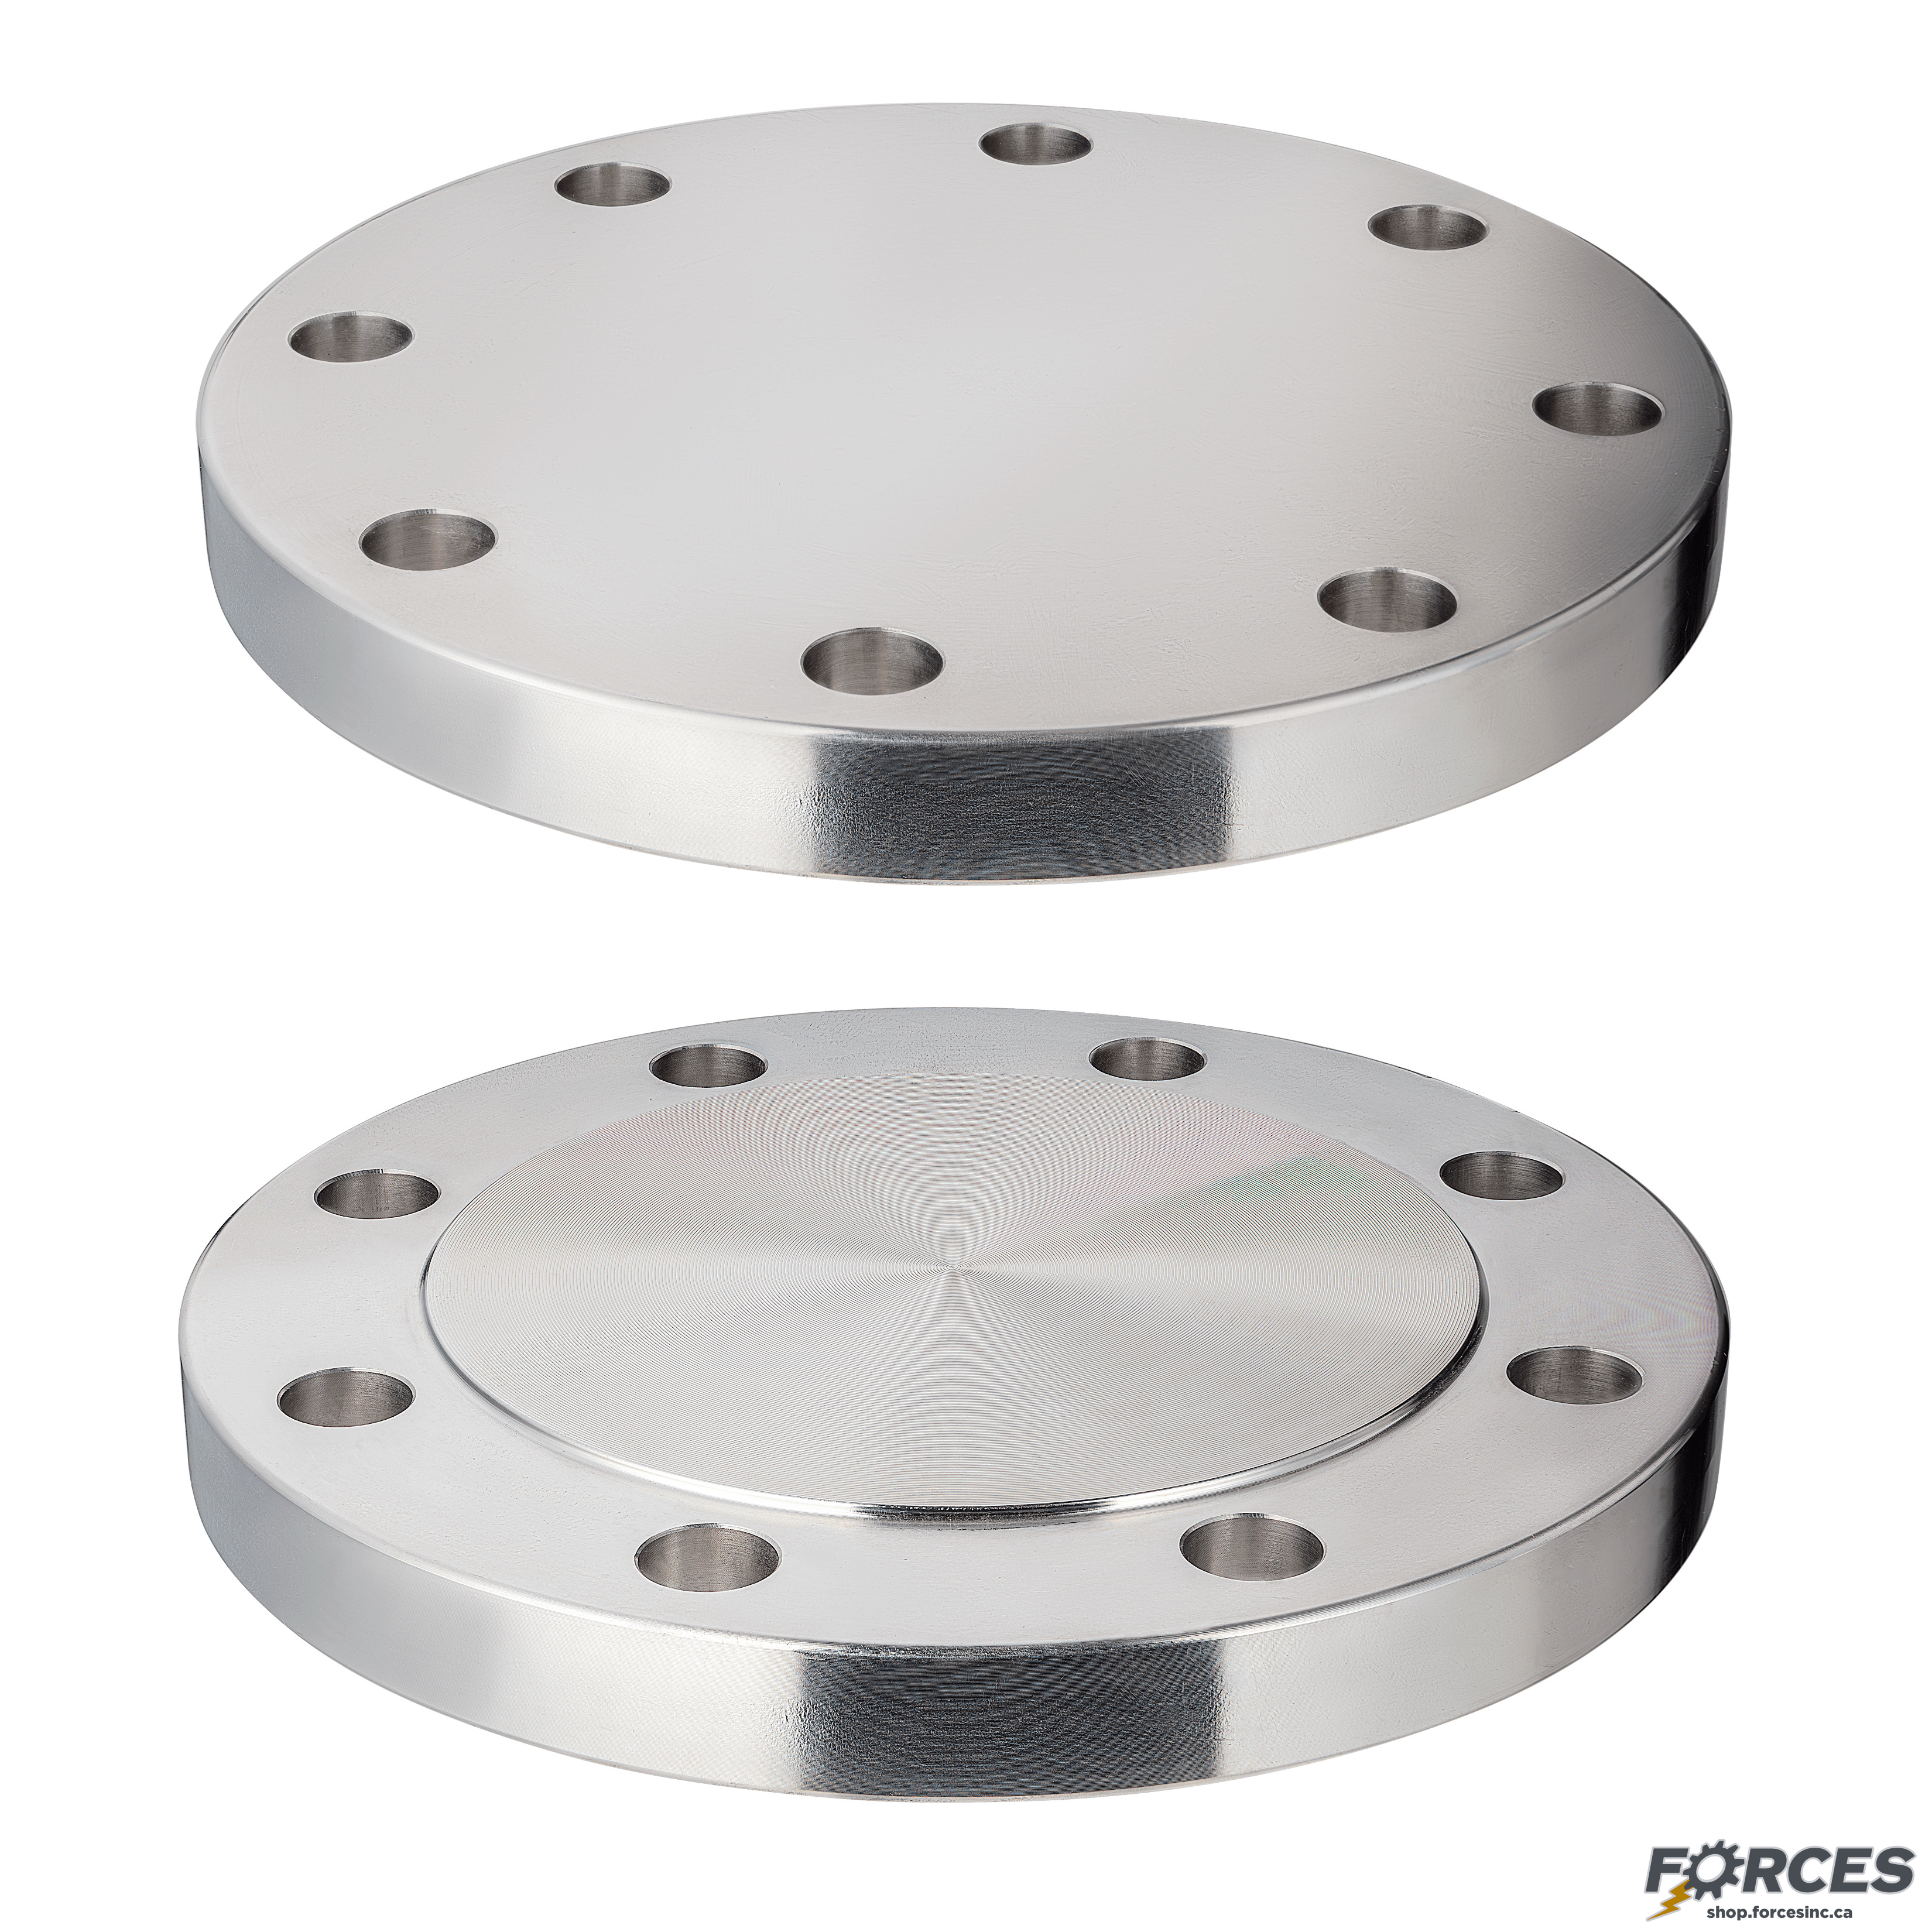 8" Blind Flange Class #150 - Stainless Steel 304 - Forces Inc